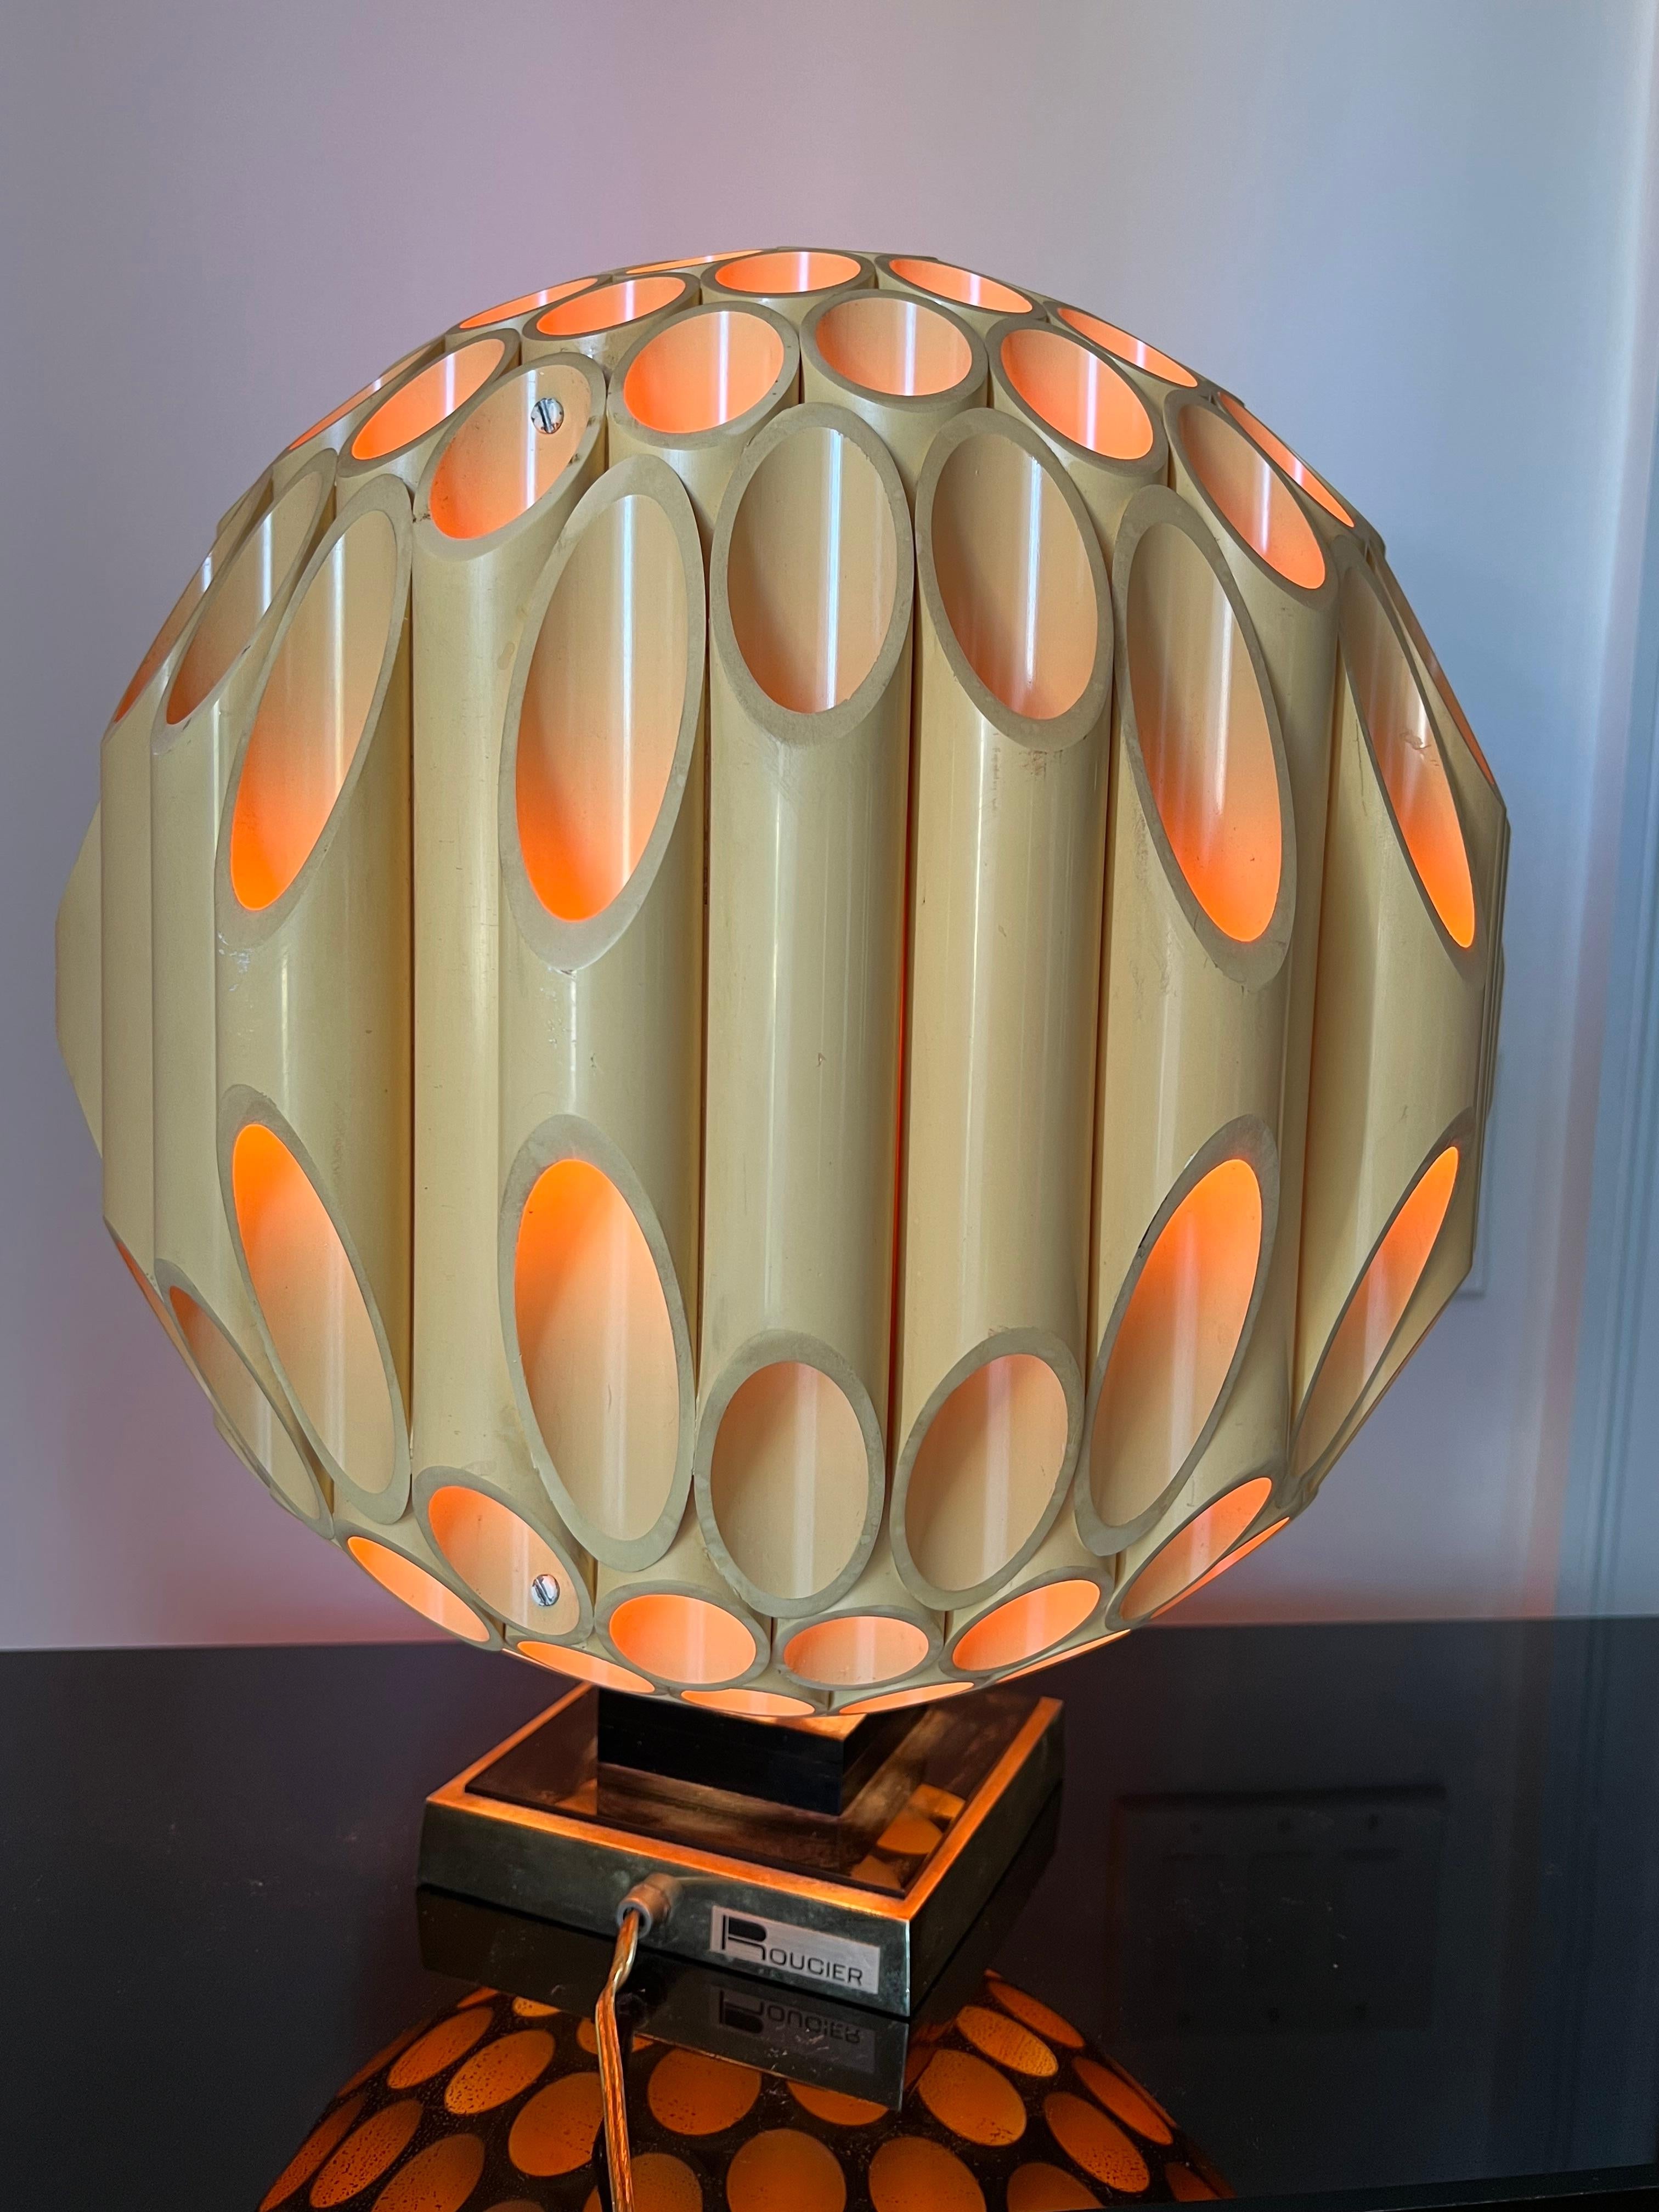 1970s Original Rougier sphere tube lamp, numbered #211, manufactured on May 19,1982. See the label on the bottom of the lamp.